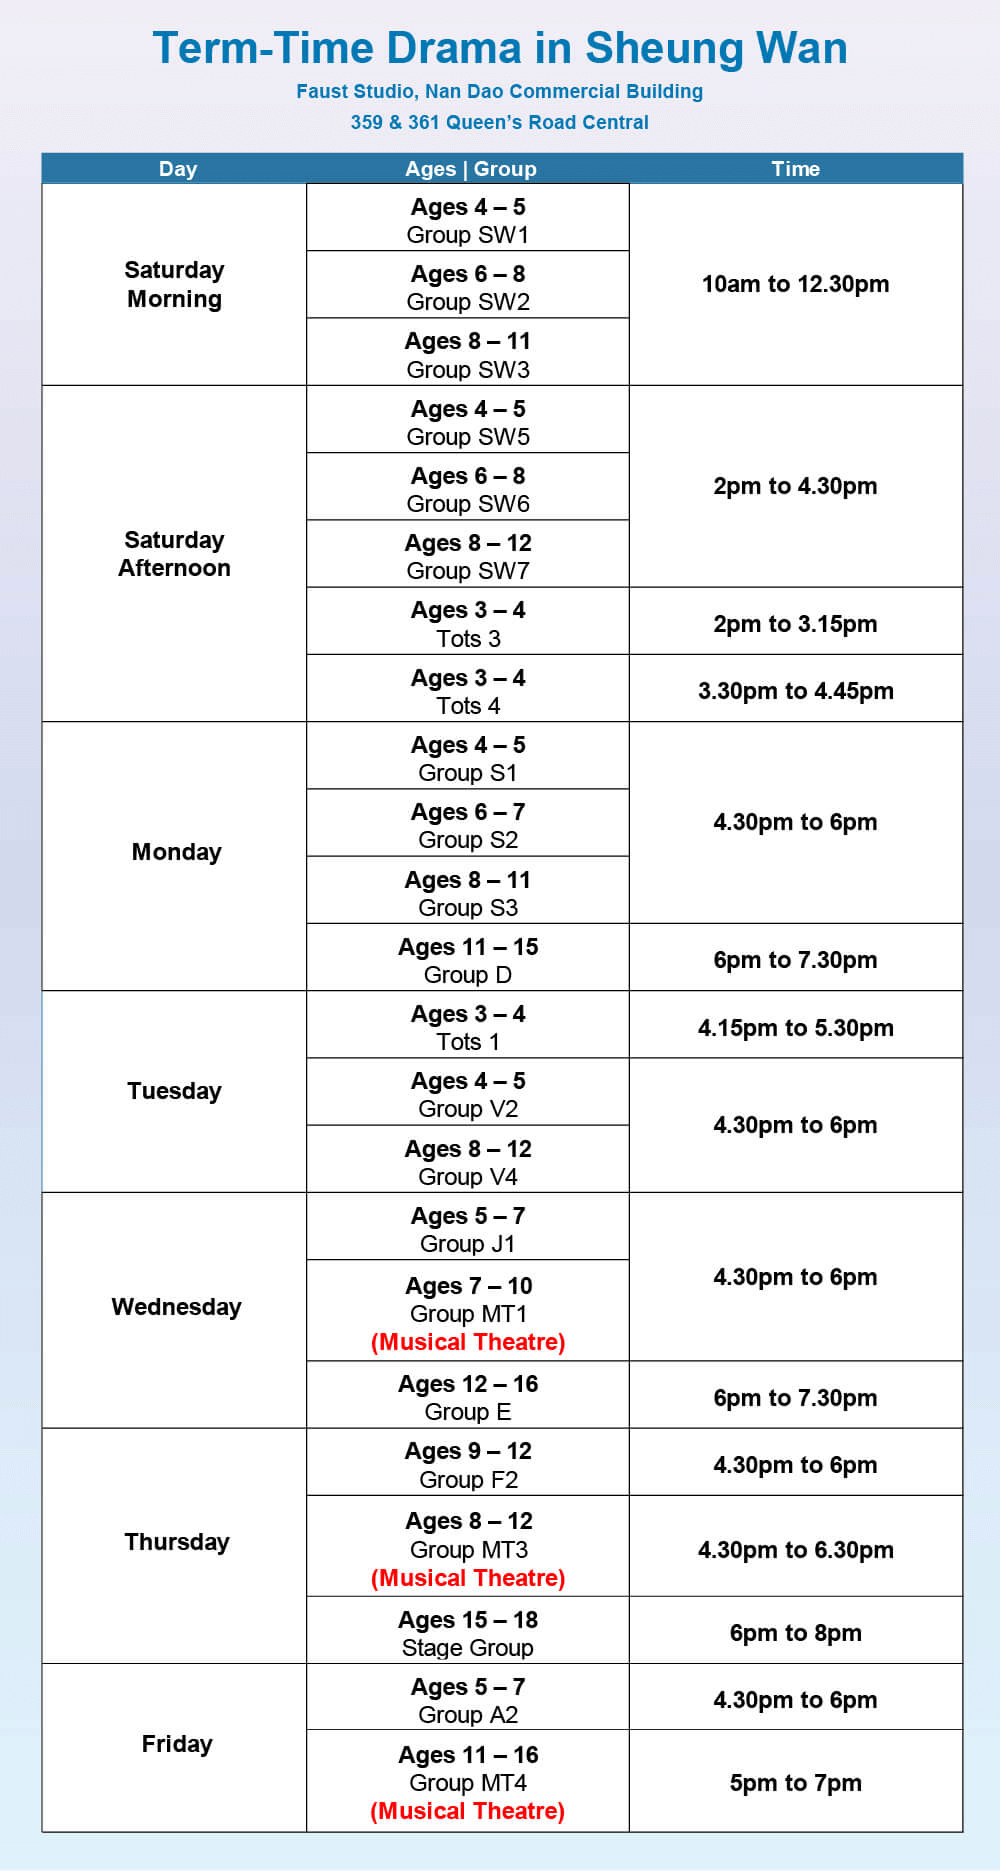 Term-Time Drama workshop schedule at the Faust Studios, Sheung Wan